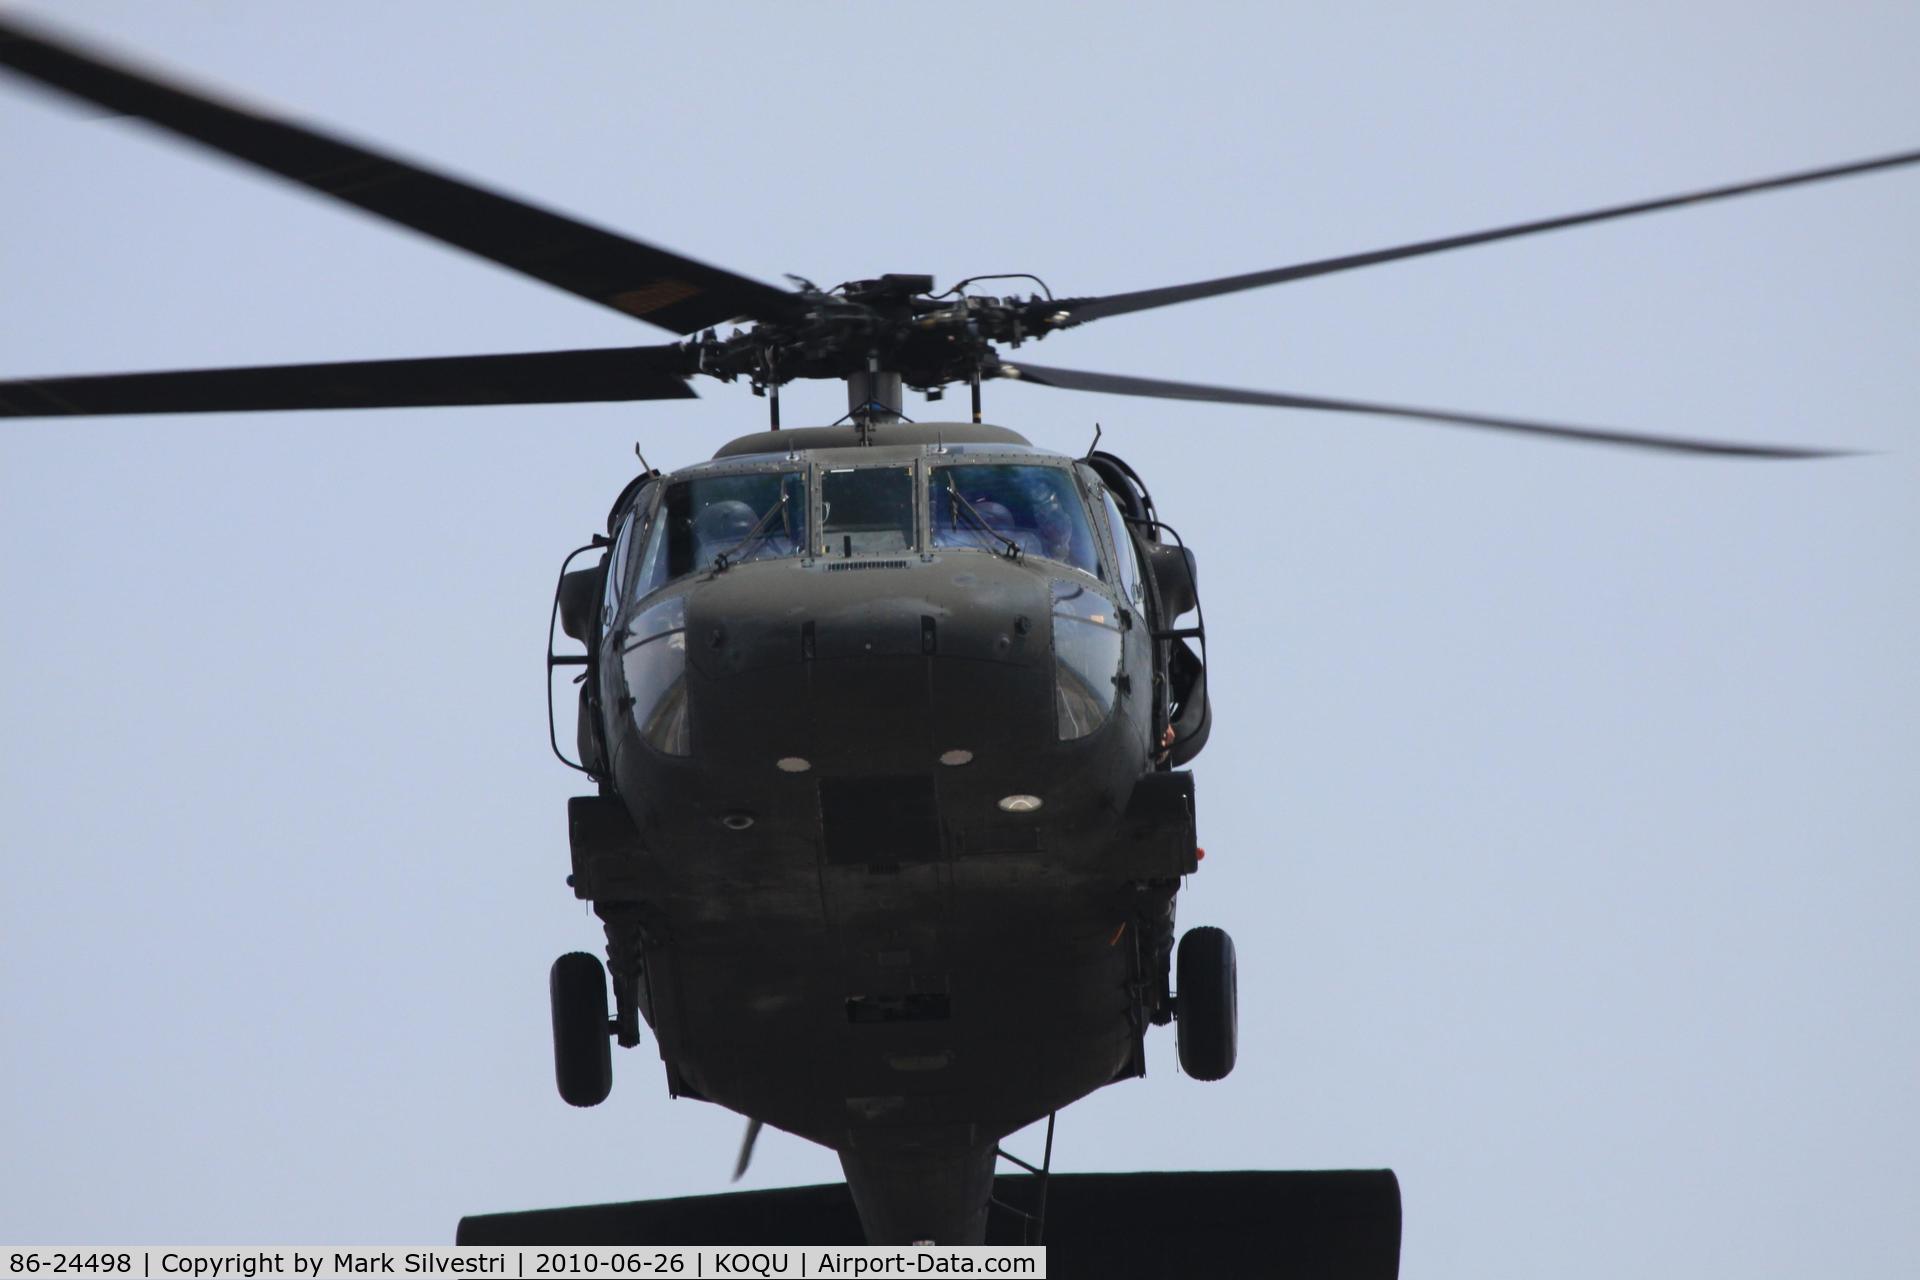 86-24498, 1986 Sikorsky UH-60A Black Hawk C/N 70.993, Quonset Point, RI 2010